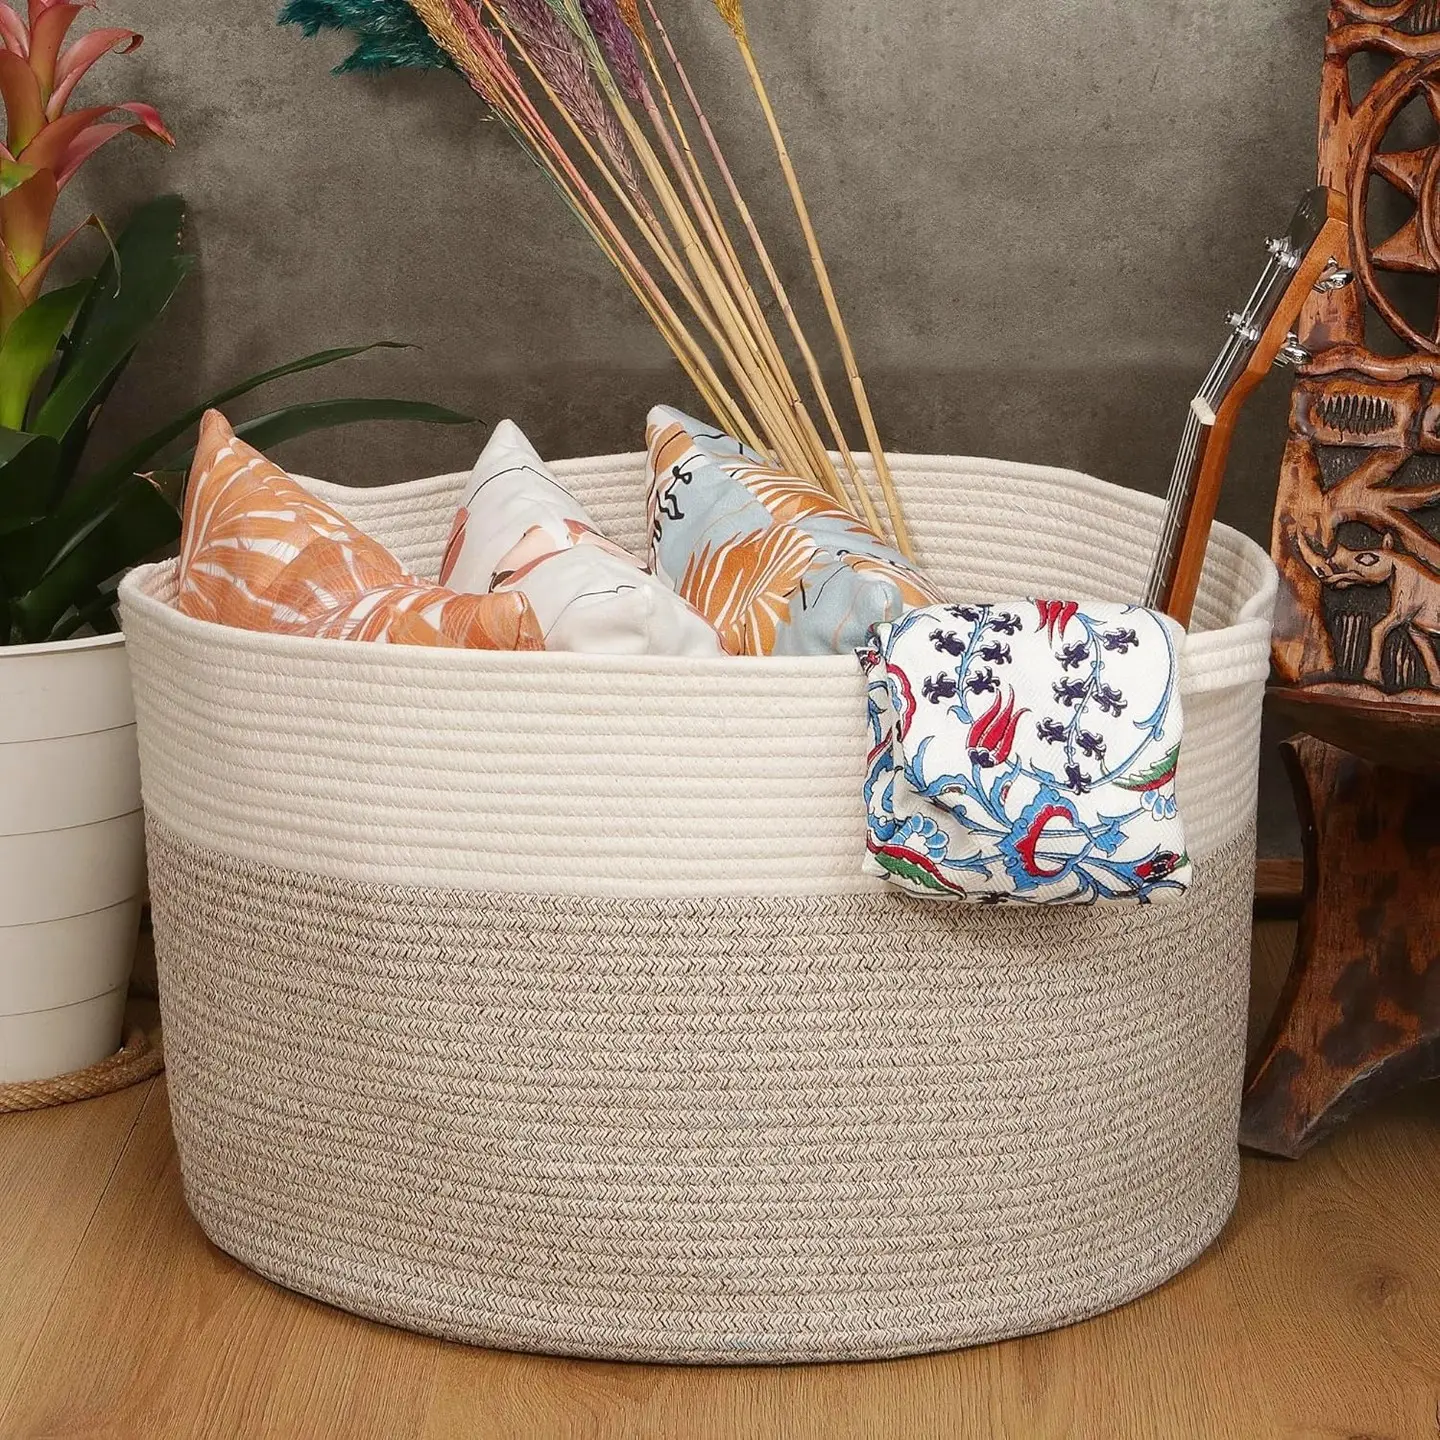 Extra Large Cotton Rope Woven Basket, Throw Blanket Storage Basket with Handles, Decorative Clothes Hamper